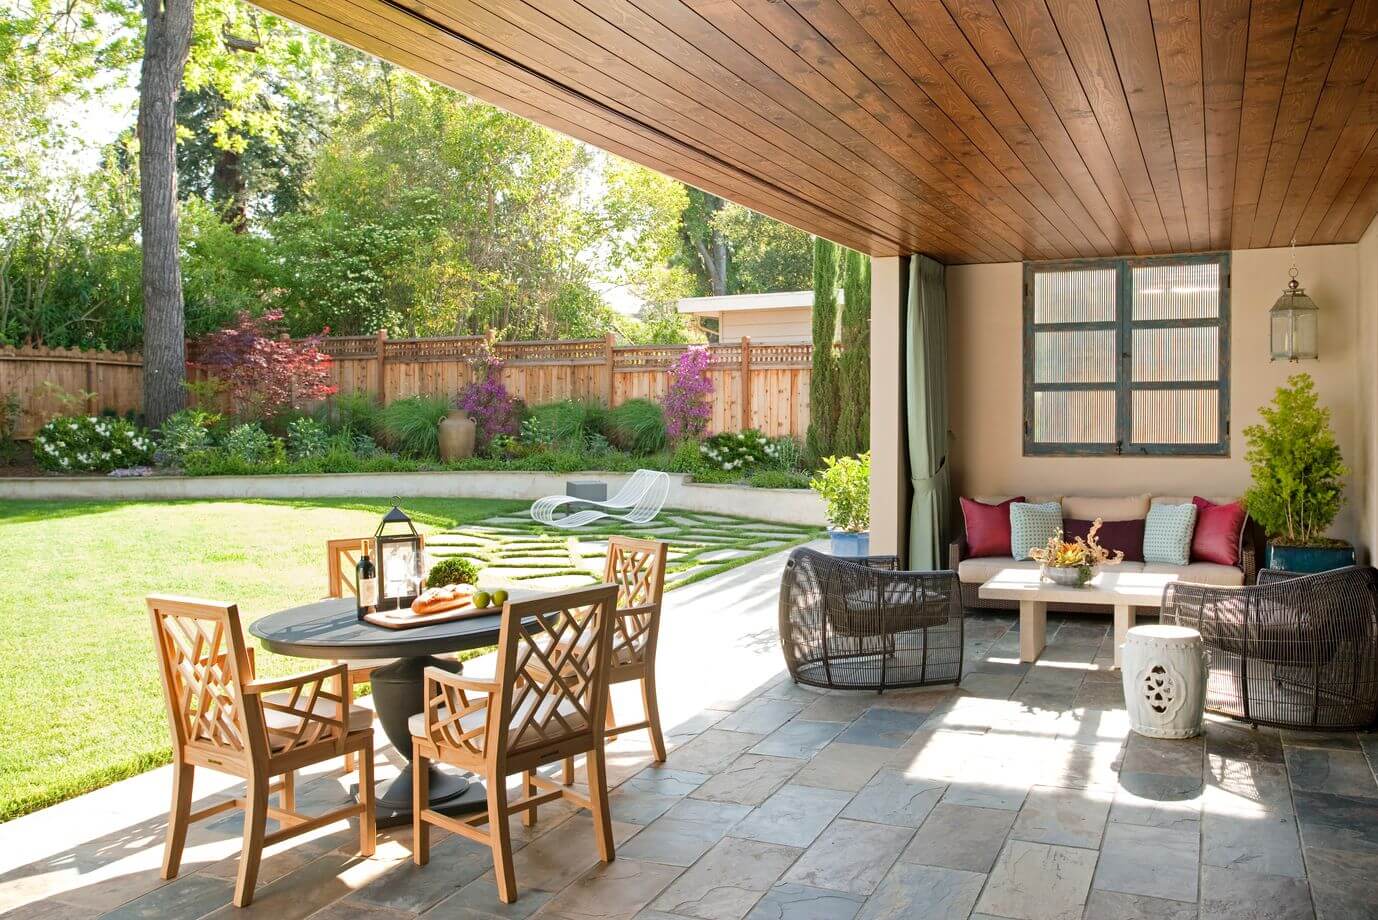 Make an Outdoor Room to revamp home